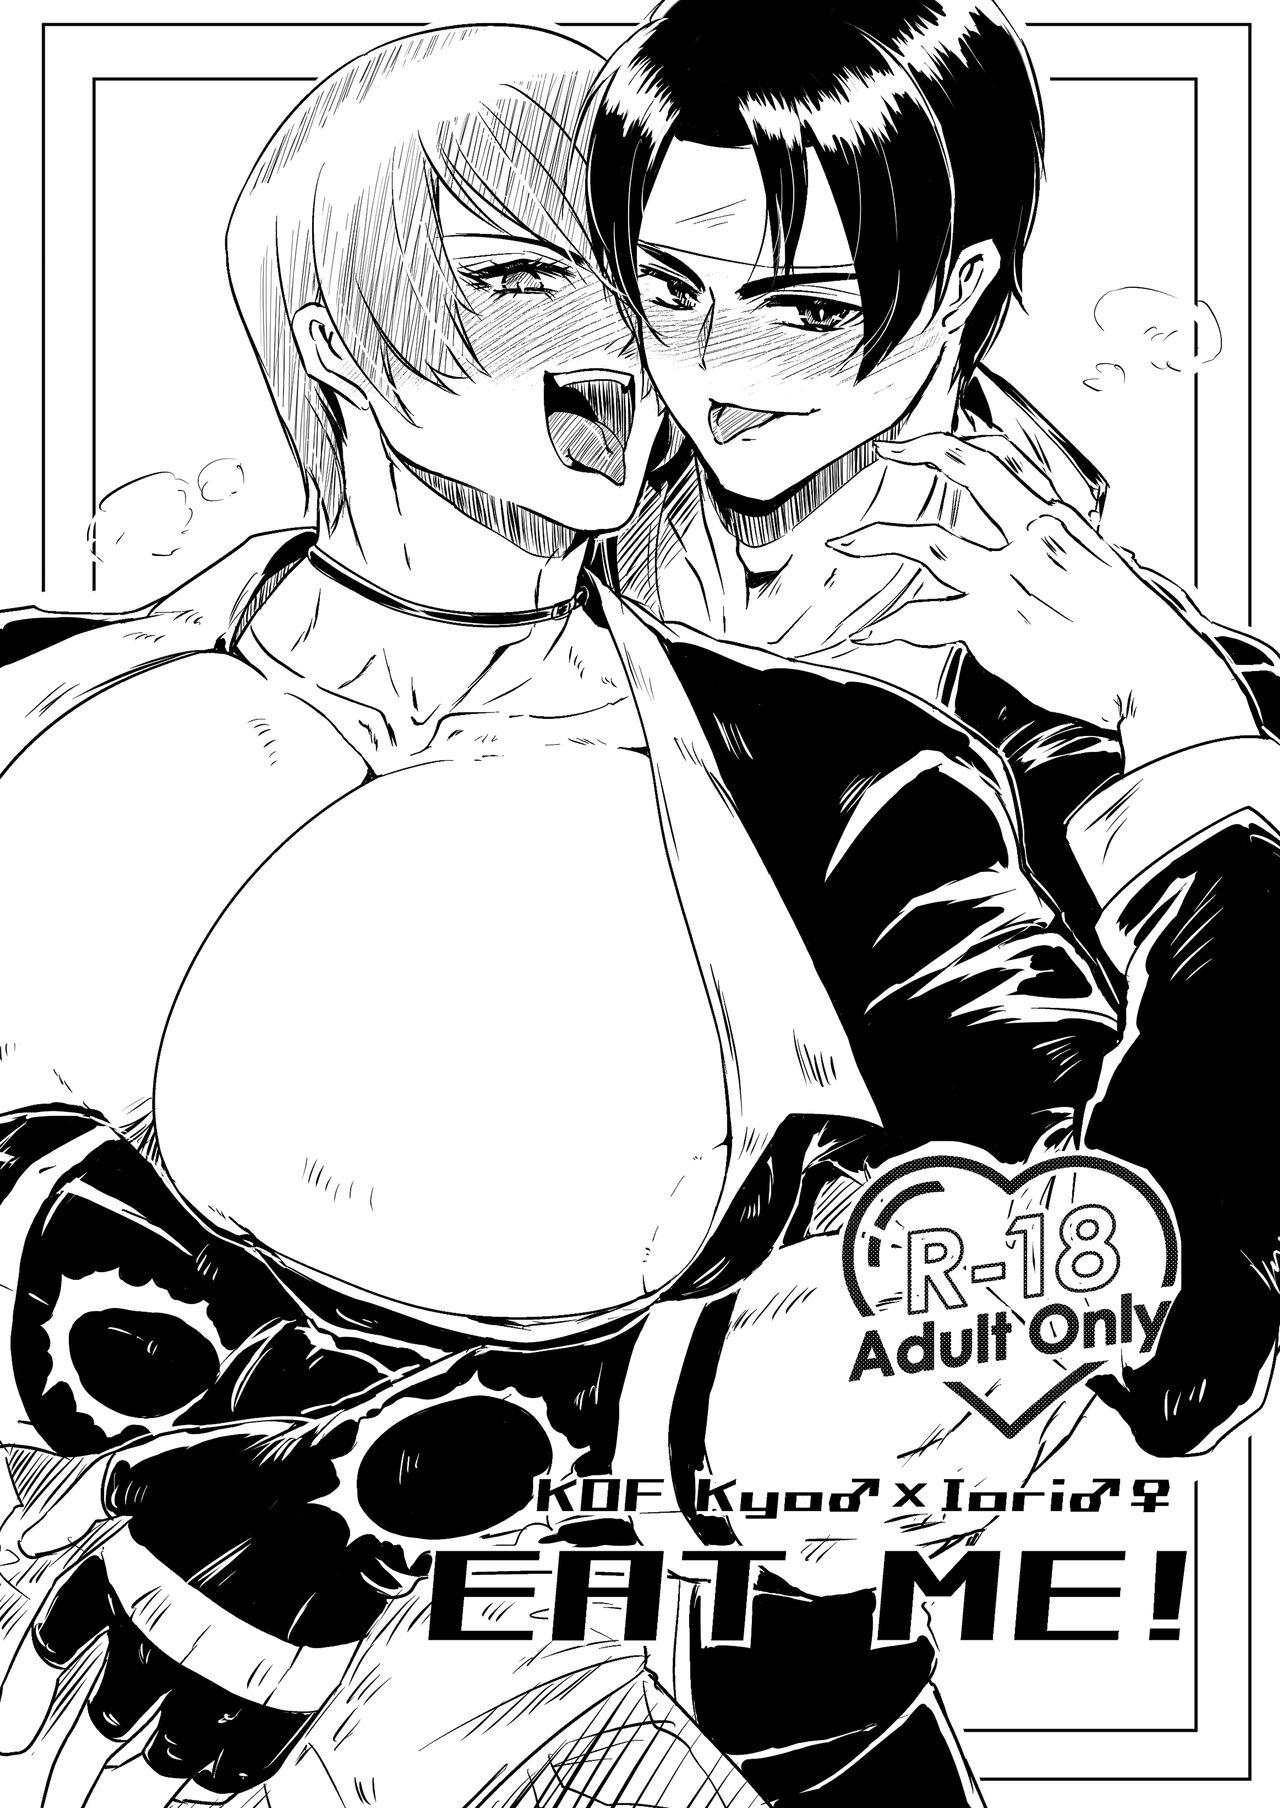 Pussy Eating R18 Manga EAT ME! - King of fighters English - Page 1